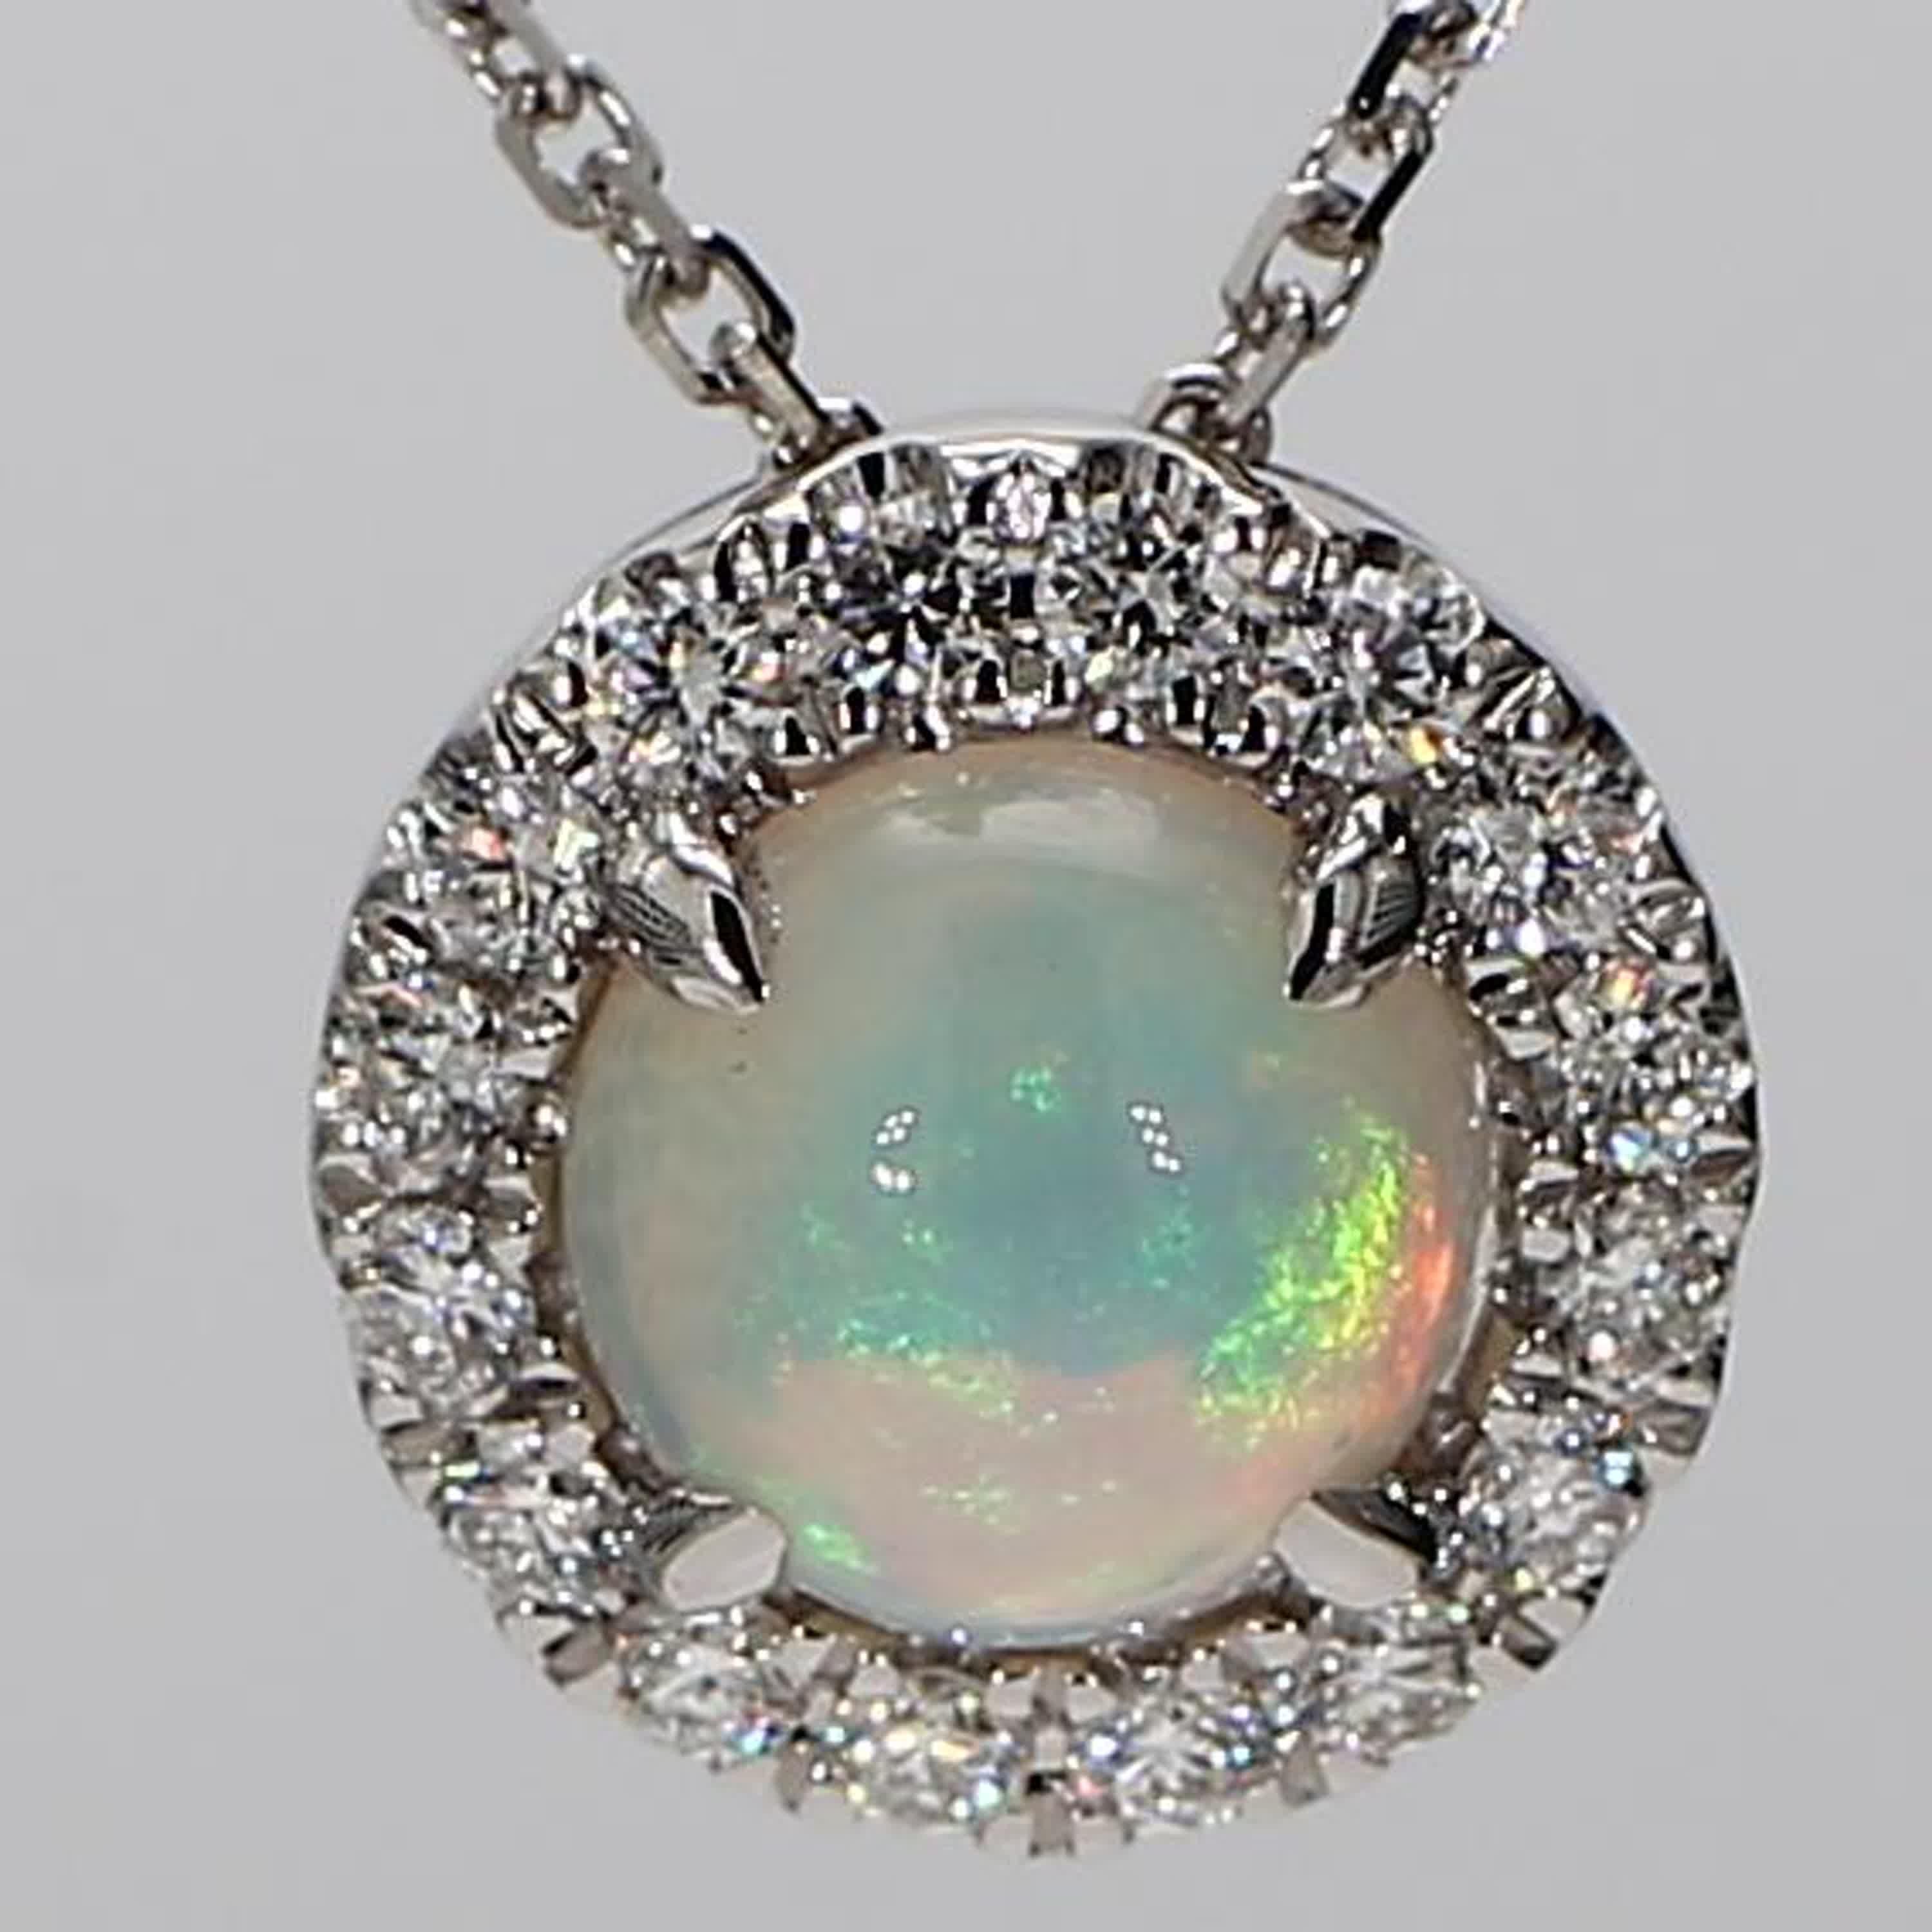 RareGemWorld's classic opal pendant. Mounted in a beautiful 18K White Gold setting with a natural round cut opal. The opal is surrounded by natural round white diamond melee in a beautiful single halo. This pendant is guaranteed to impress and